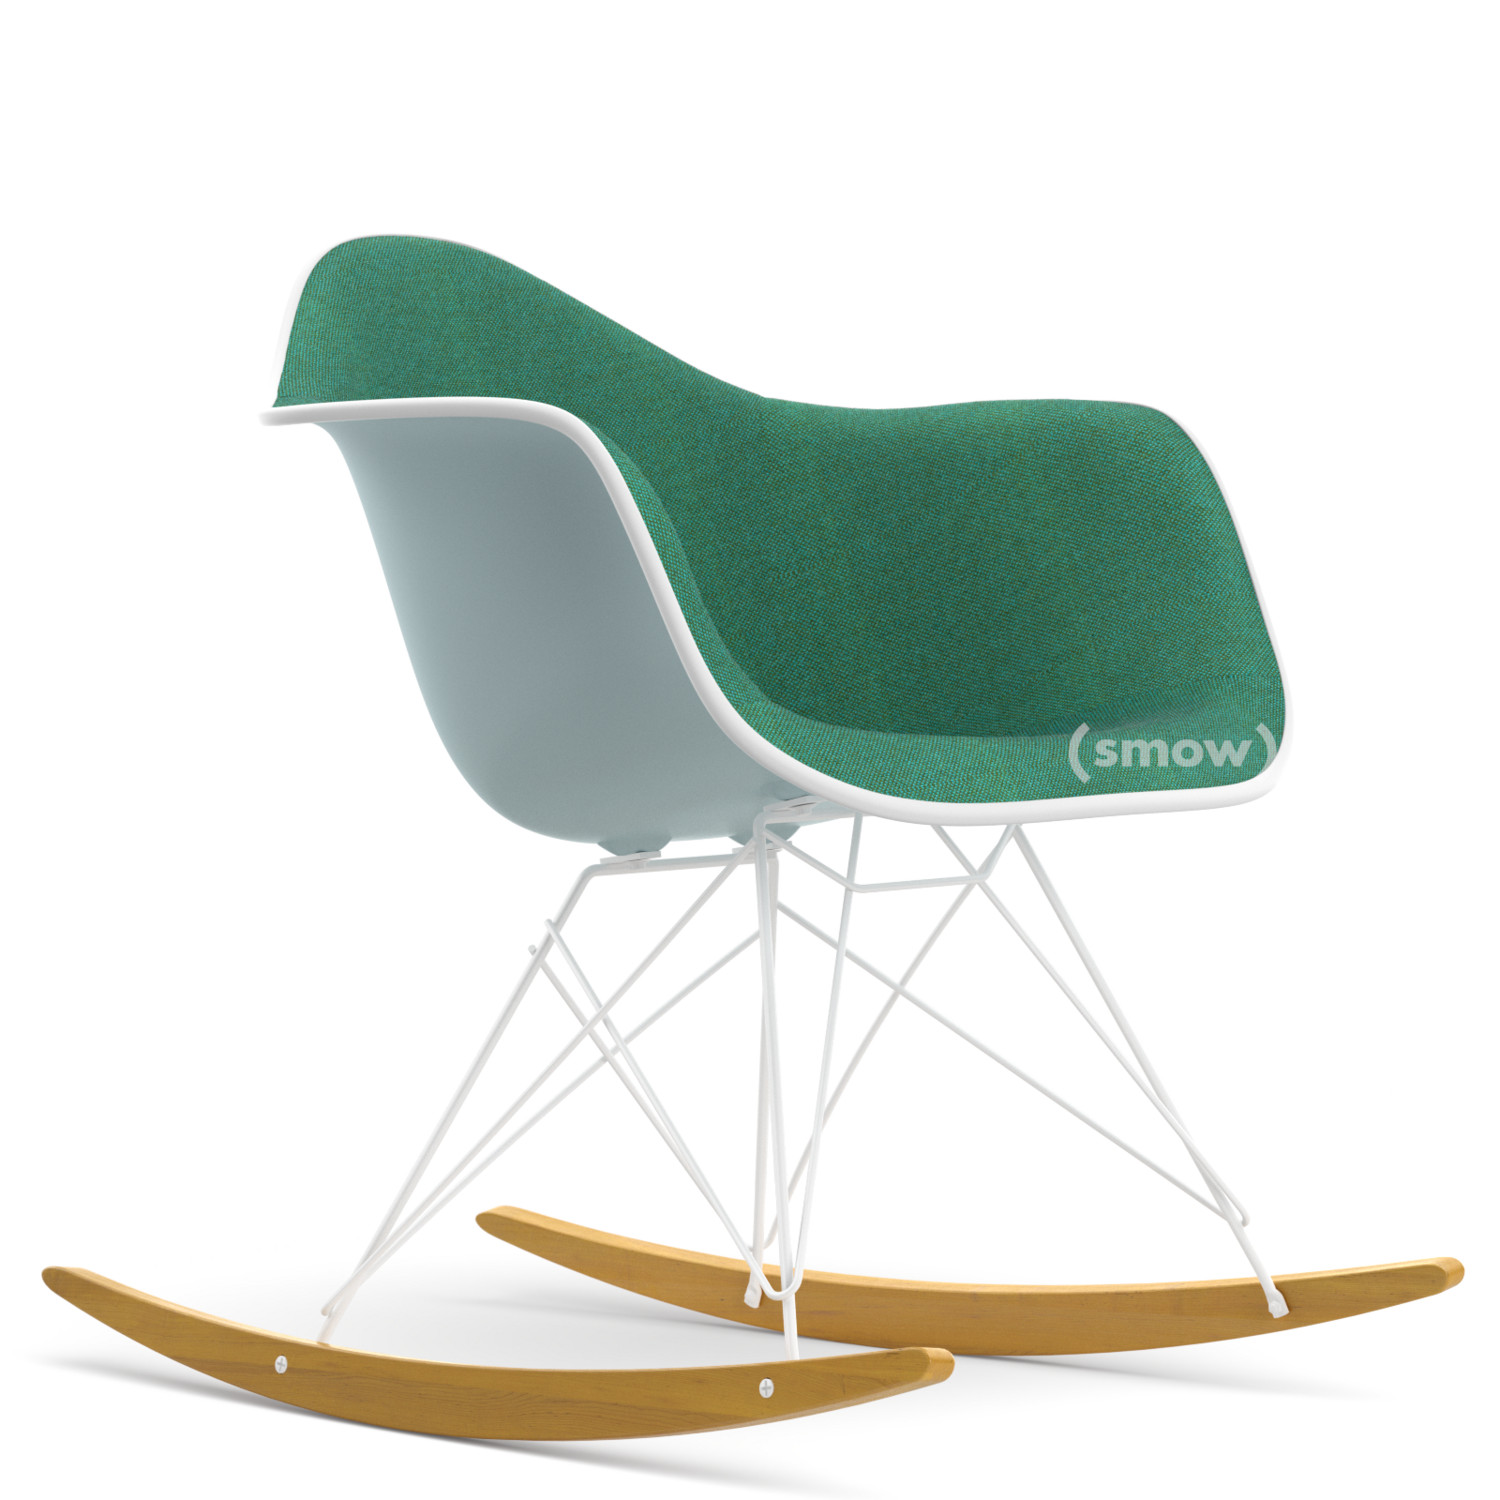 Vitra Rar With Upholstery Ice Grey With Full Upholstery Mint Forest White White Yellowish Maple By Charles Ray Eames 1950 Designer Furniture By Smow Com